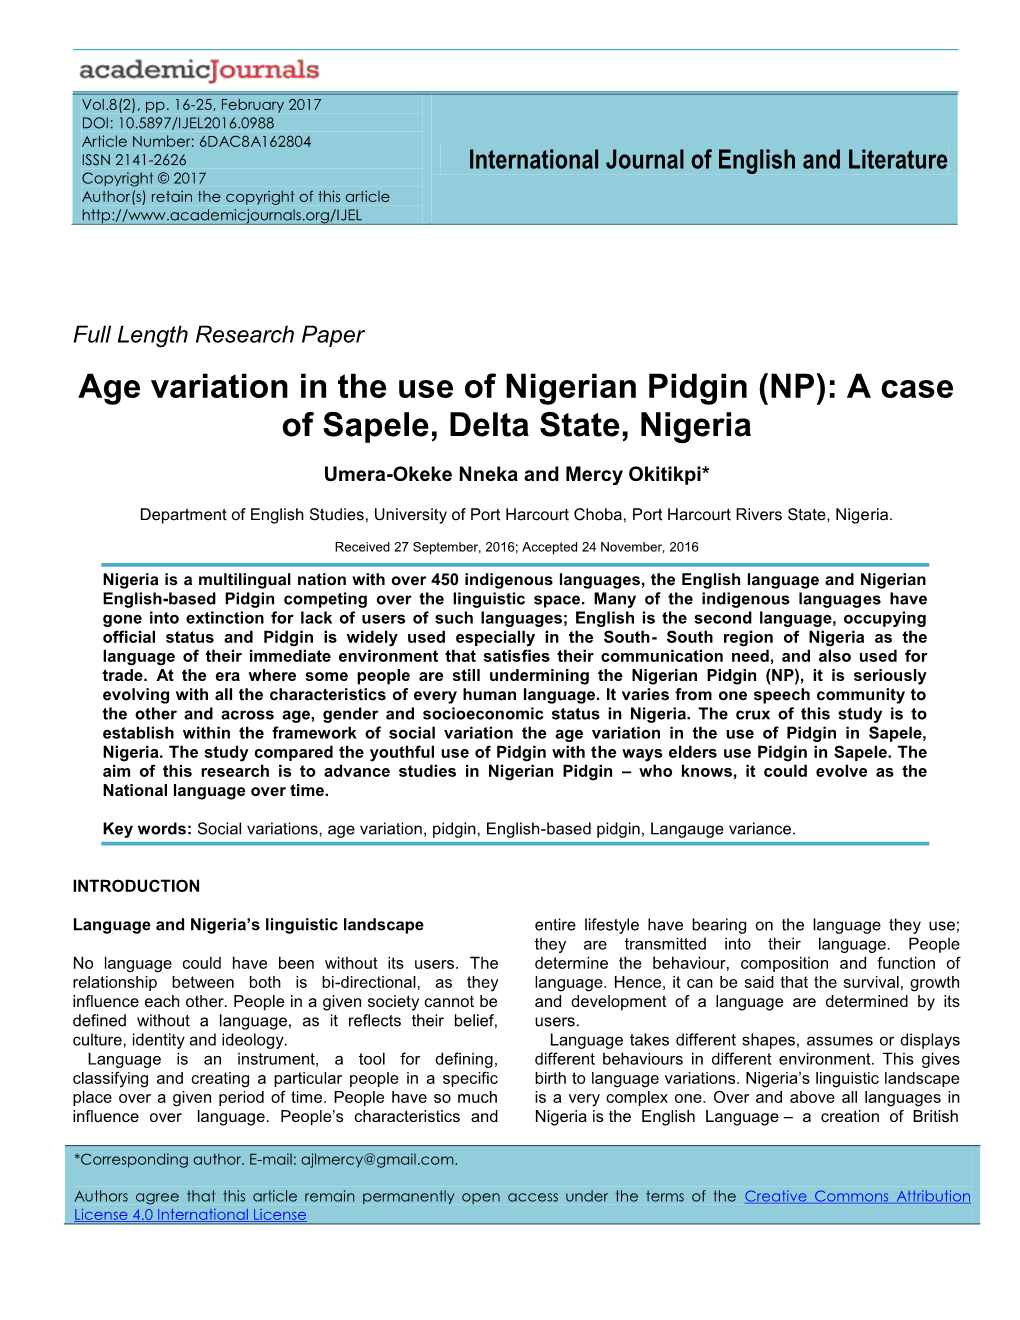 Age Variation in the Use of Nigerian Pidgin (NP): a Case of Sapele, Delta State, Nigeria